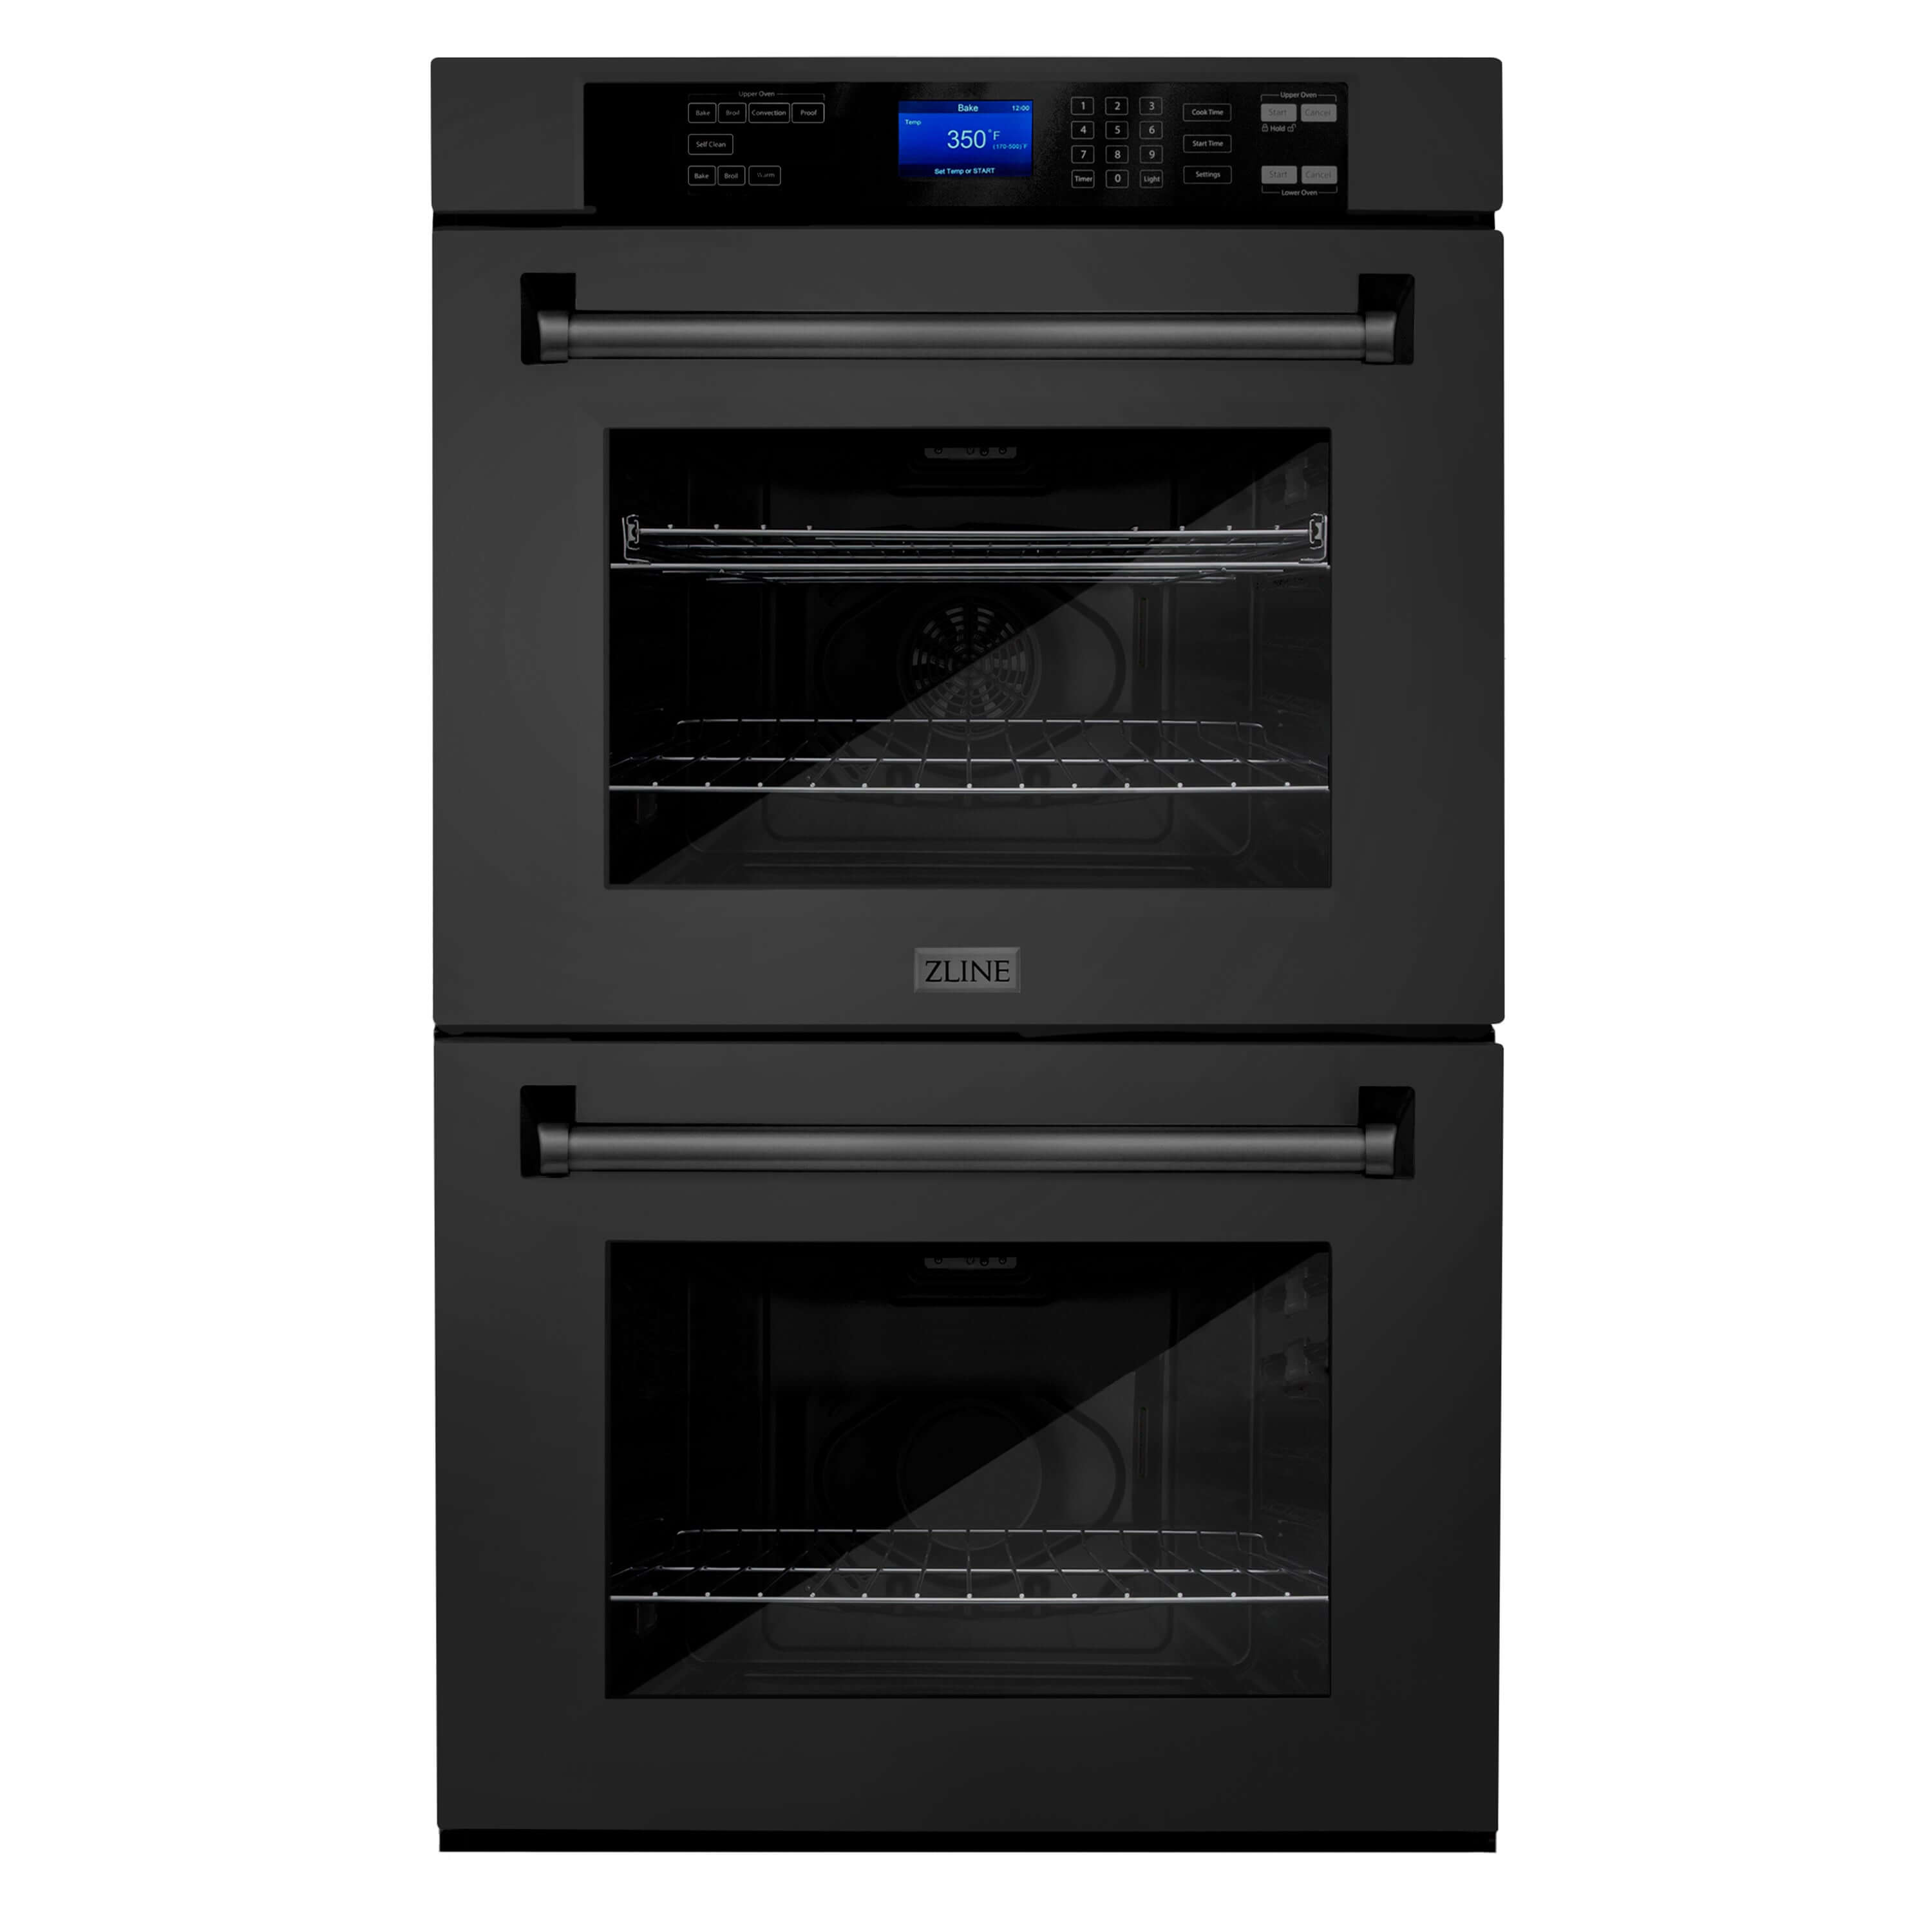 ZLINE Kitchen Package in Black Stainless Steel with 36 in. French Door Refrigerator, 36 in. Gas Stovetop, 36 in. Convertible Vent Range Hood, 30 in. Double Wall Oven, and 24 in. Tall Tub Dishwasher (5KPR-RTBRH36-AWDDWV)